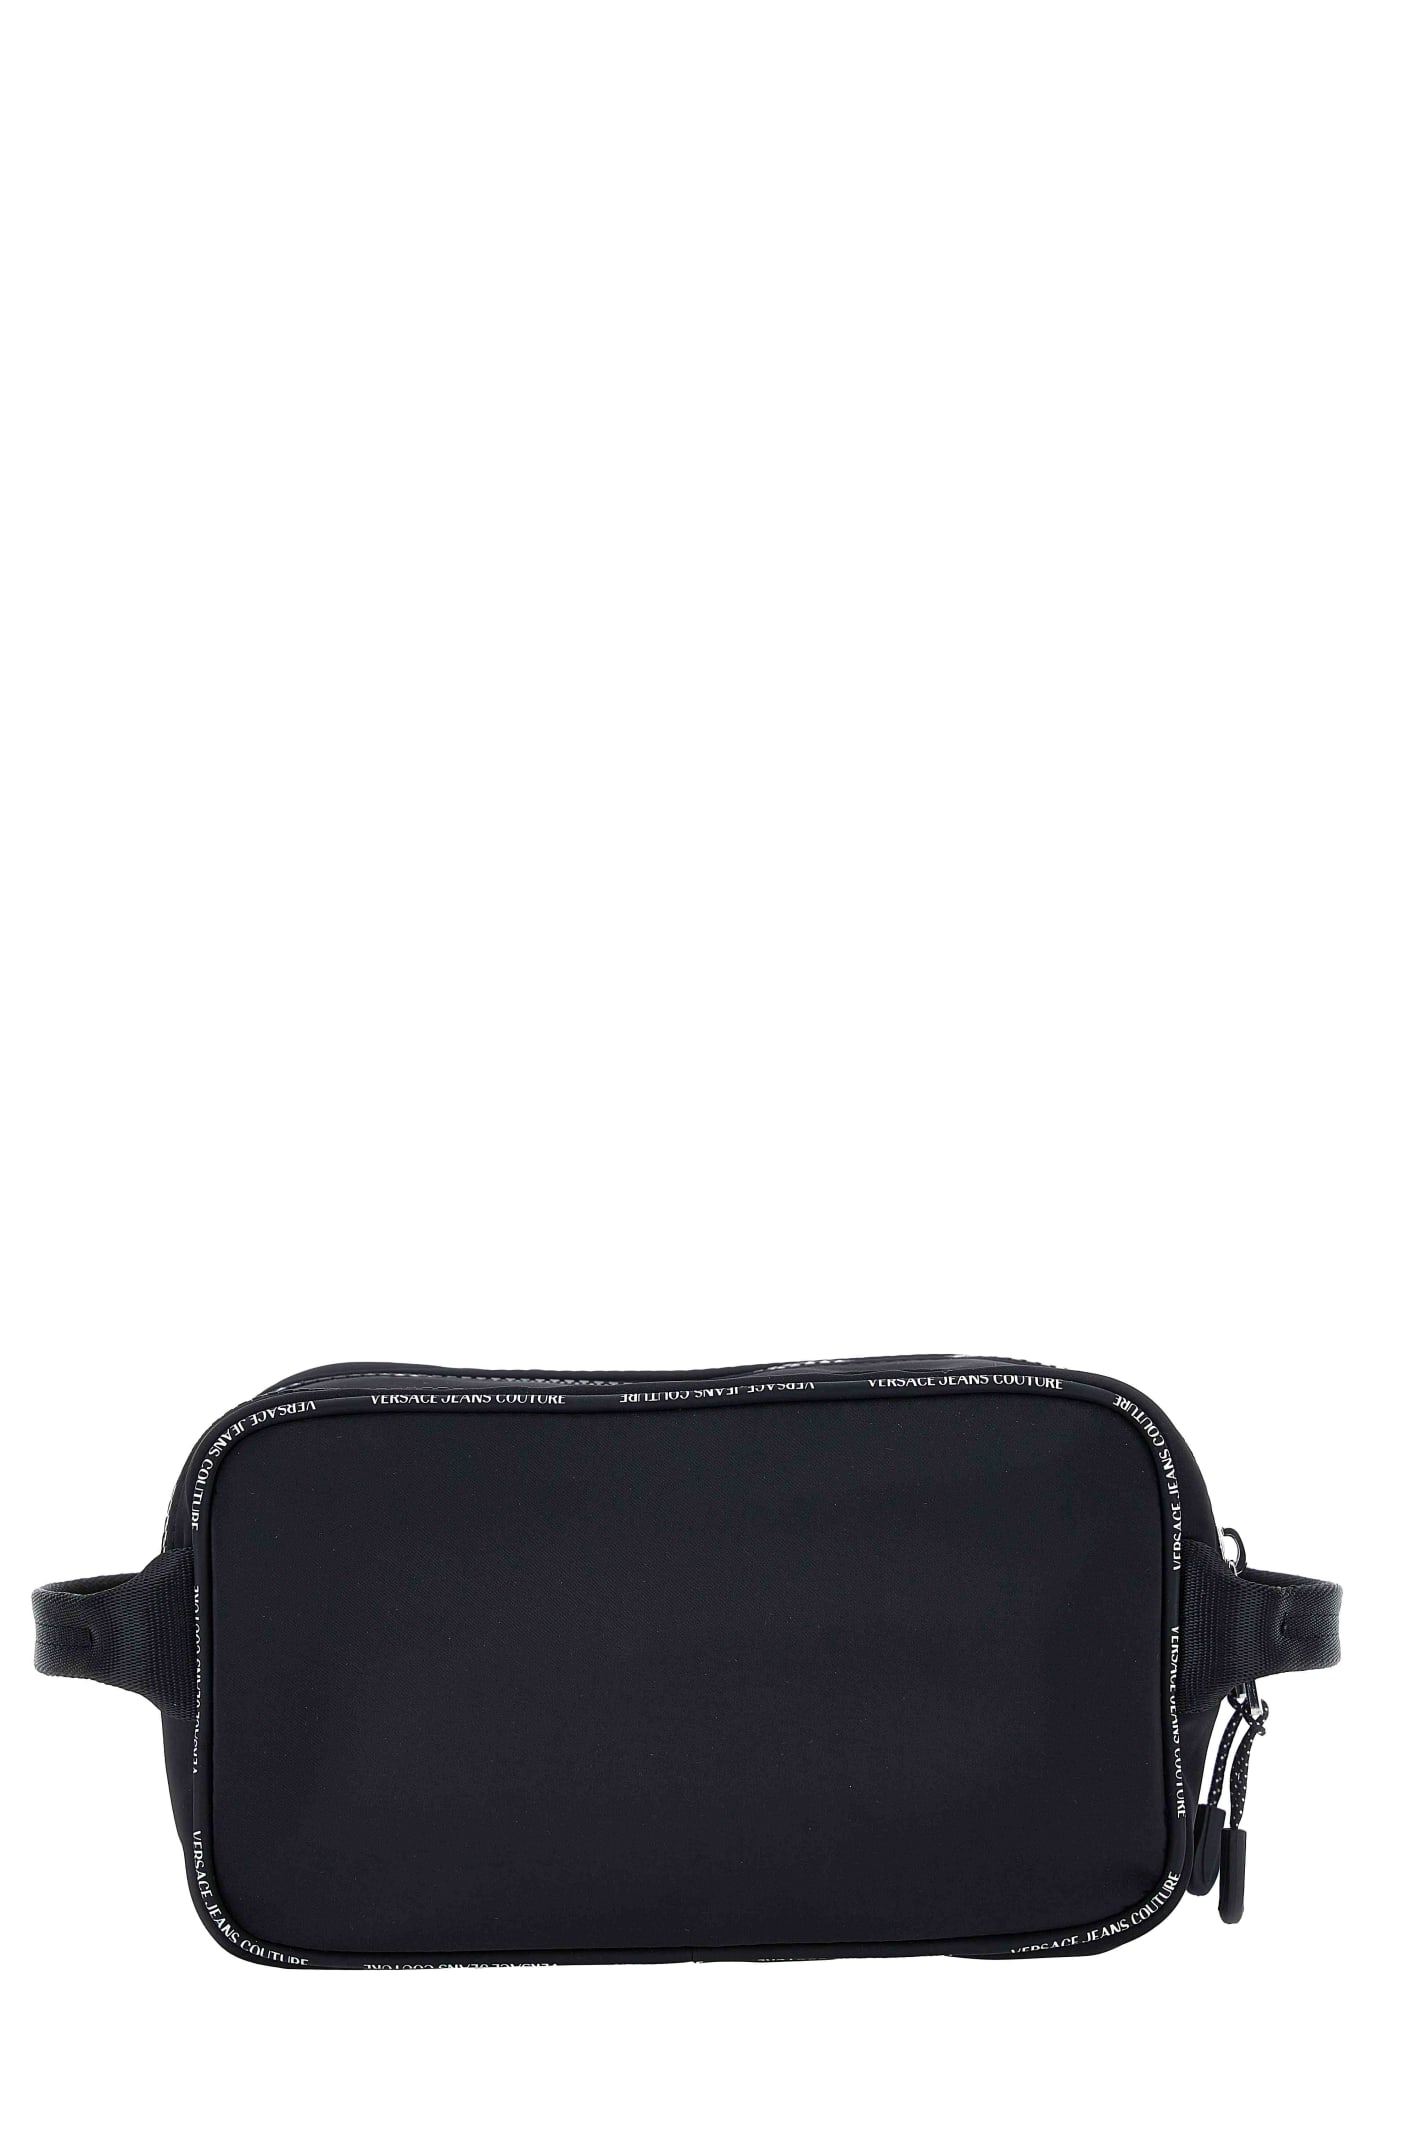 Shop Versace Jeans Couture Bag In Black